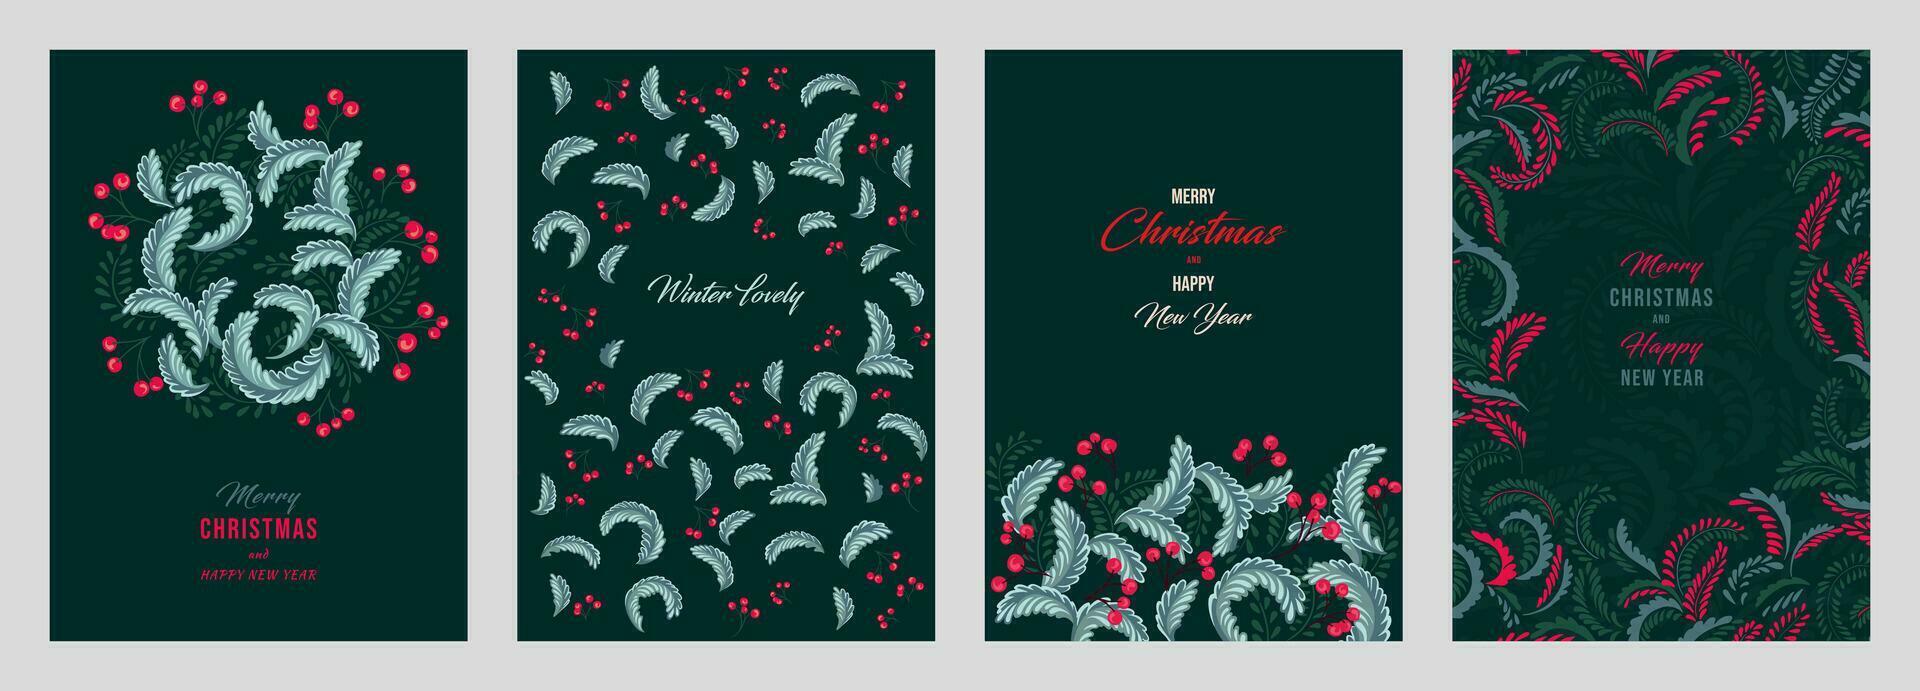 Christmas templates with copy space. Set greeting cards Merry Christmas, Happy New Year with vector hand drawn decorative Christmas wreath, ornate floral frame, Christmas ornament